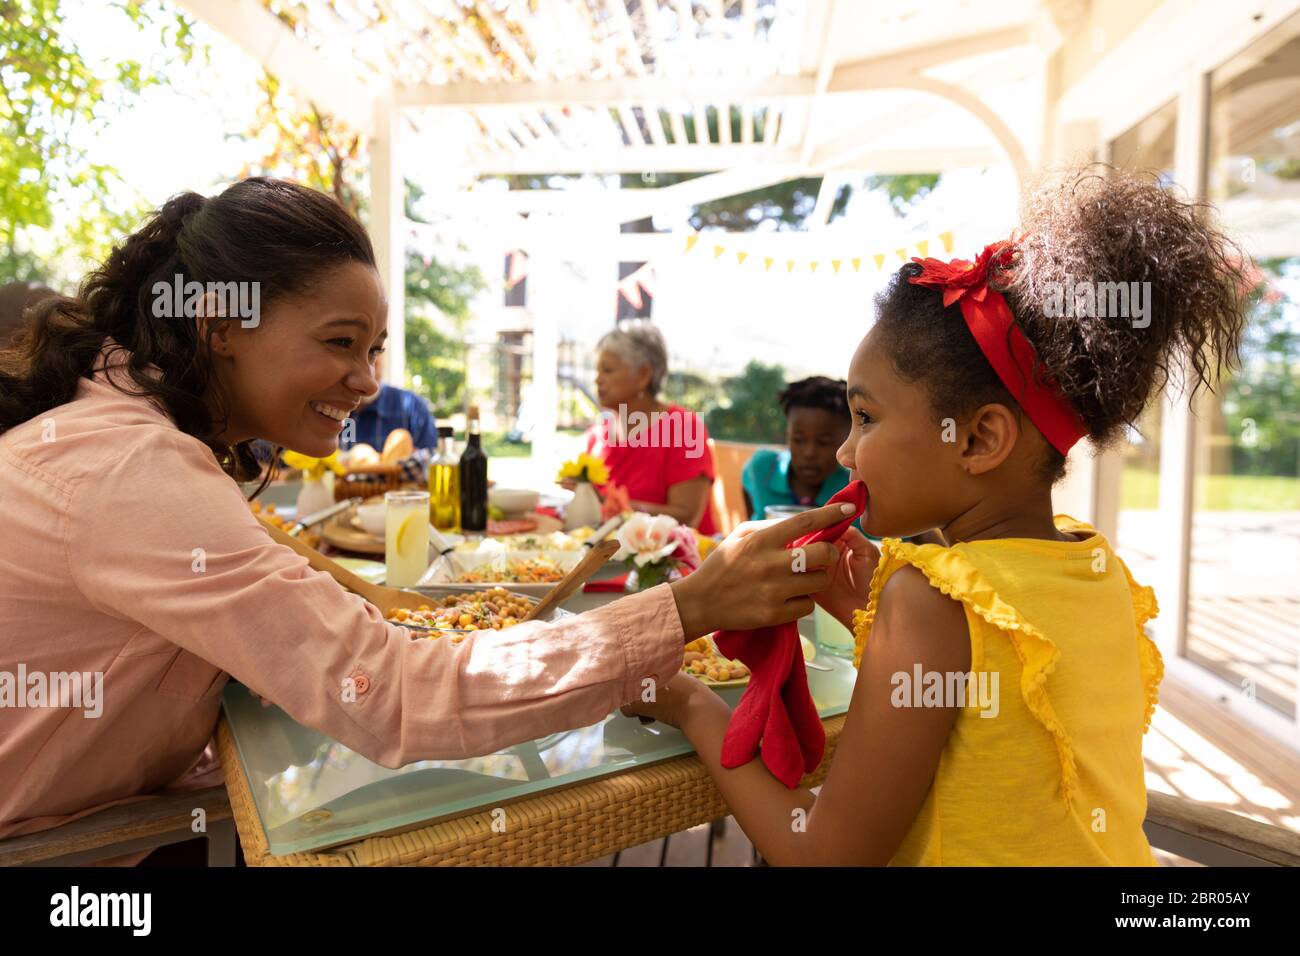 Family eating together at table Stock Photo